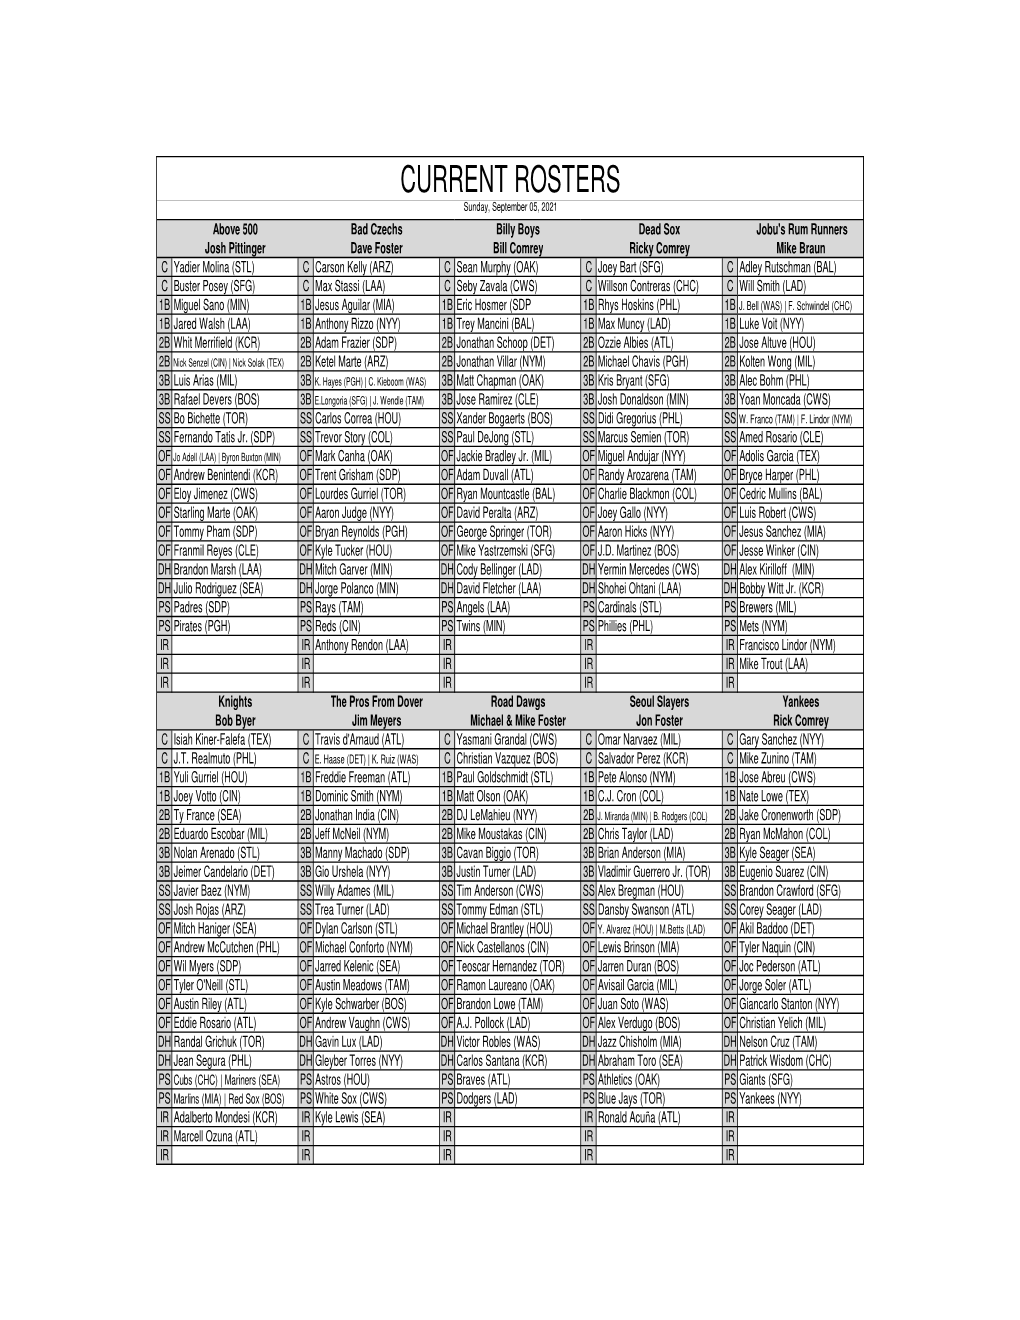 Current Rosters